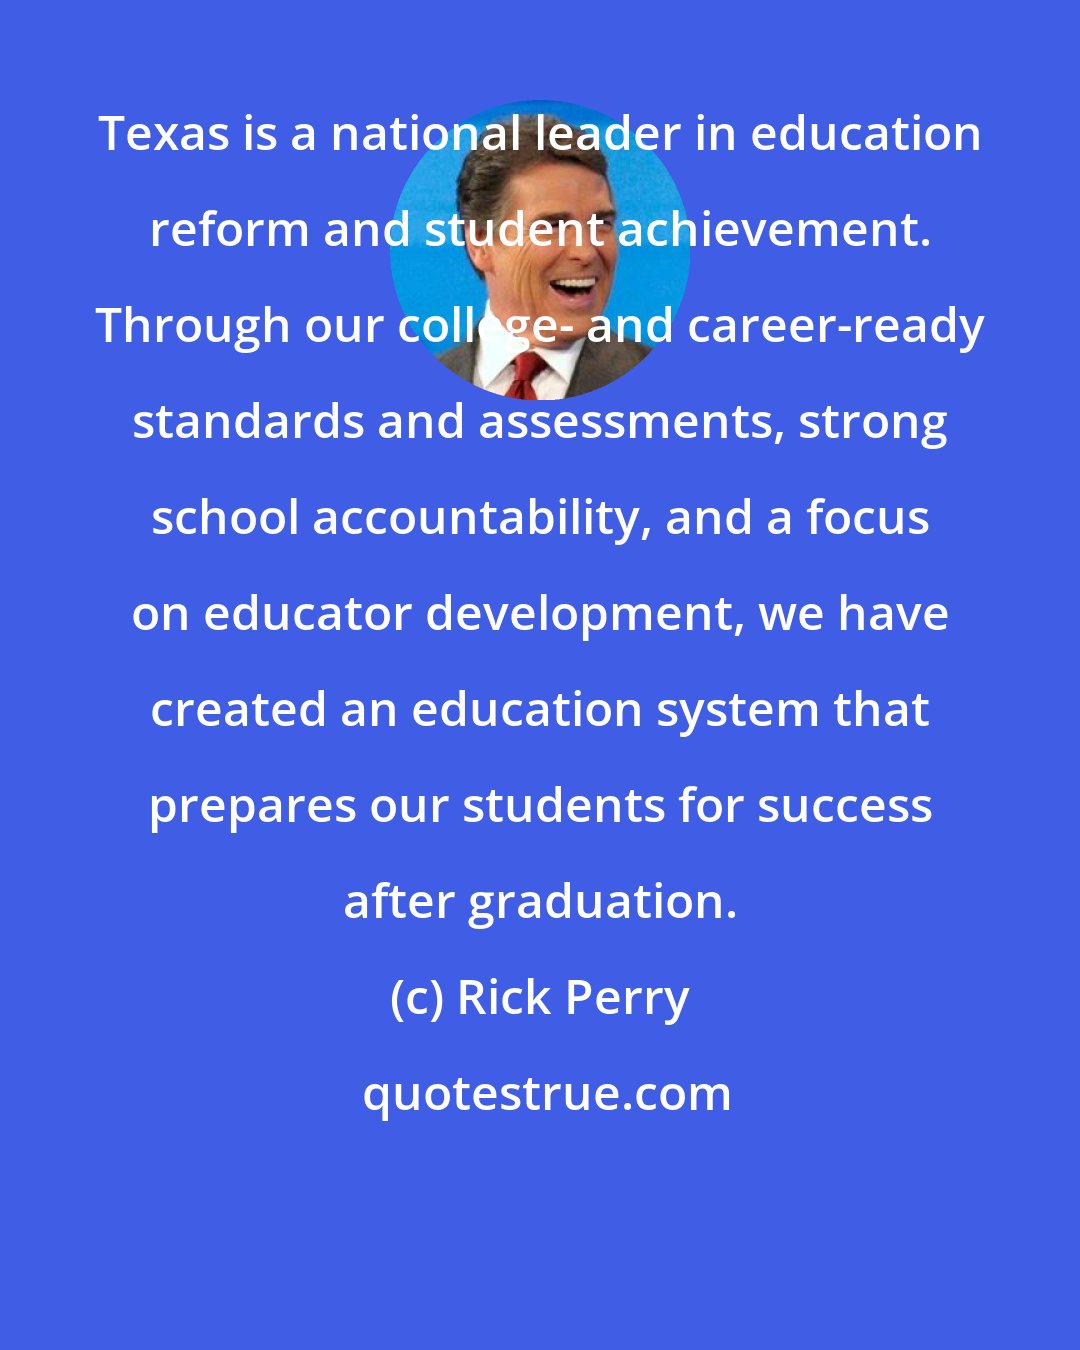 Rick Perry: Texas is a national leader in education reform and student achievement. Through our college- and career-ready standards and assessments, strong school accountability, and a focus on educator development, we have created an education system that prepares our students for success after graduation.